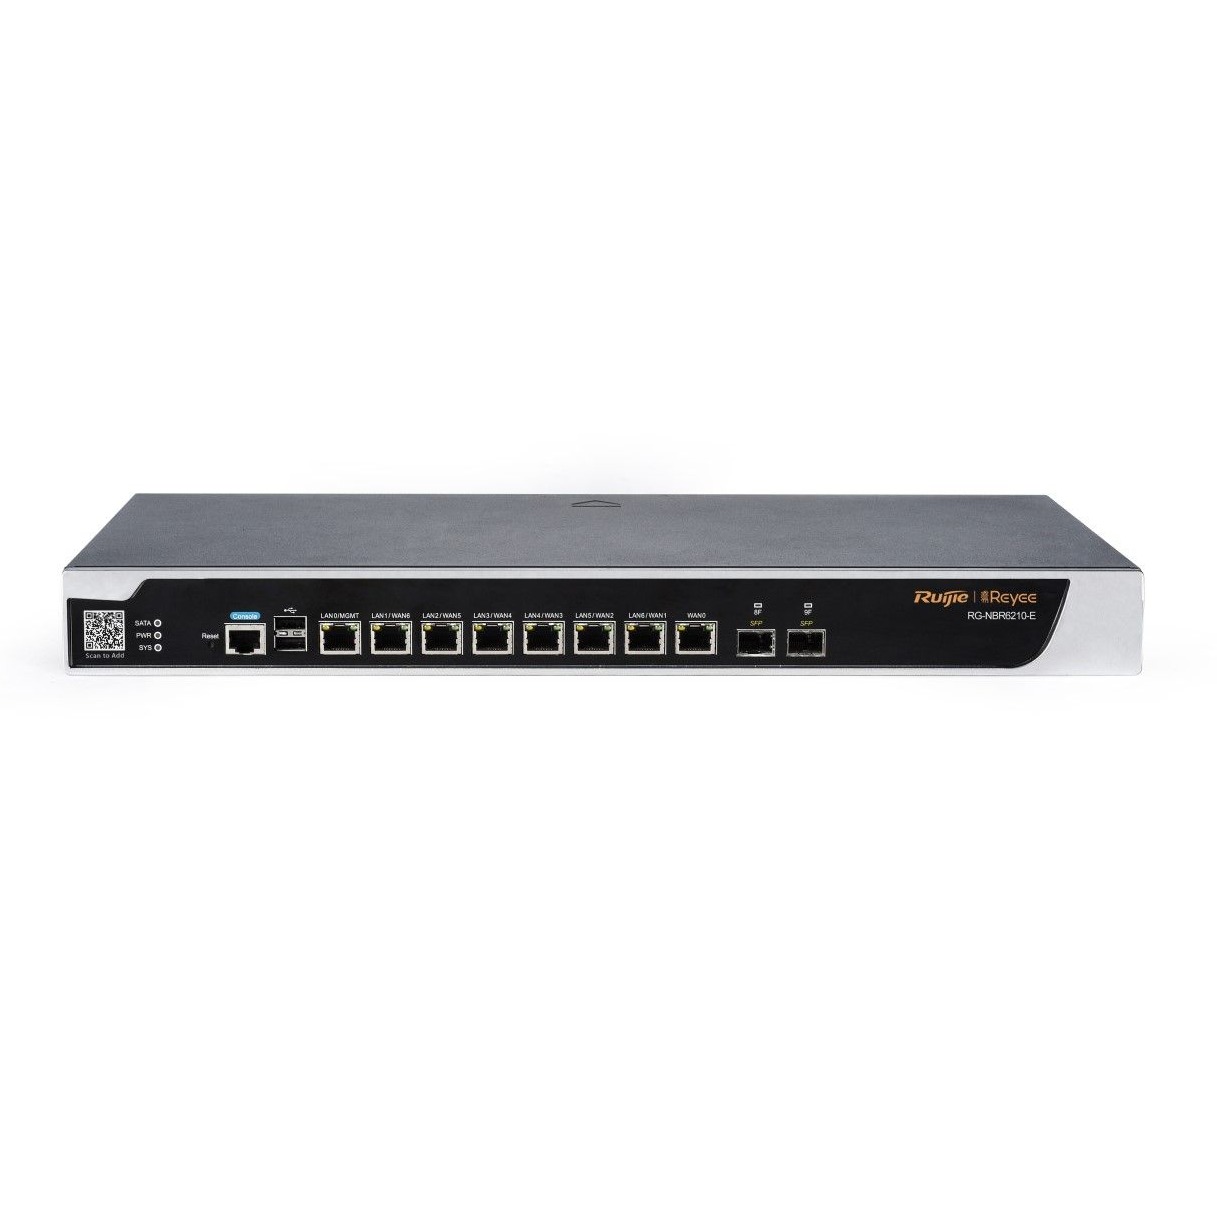 performance Cloud Managed Security Router